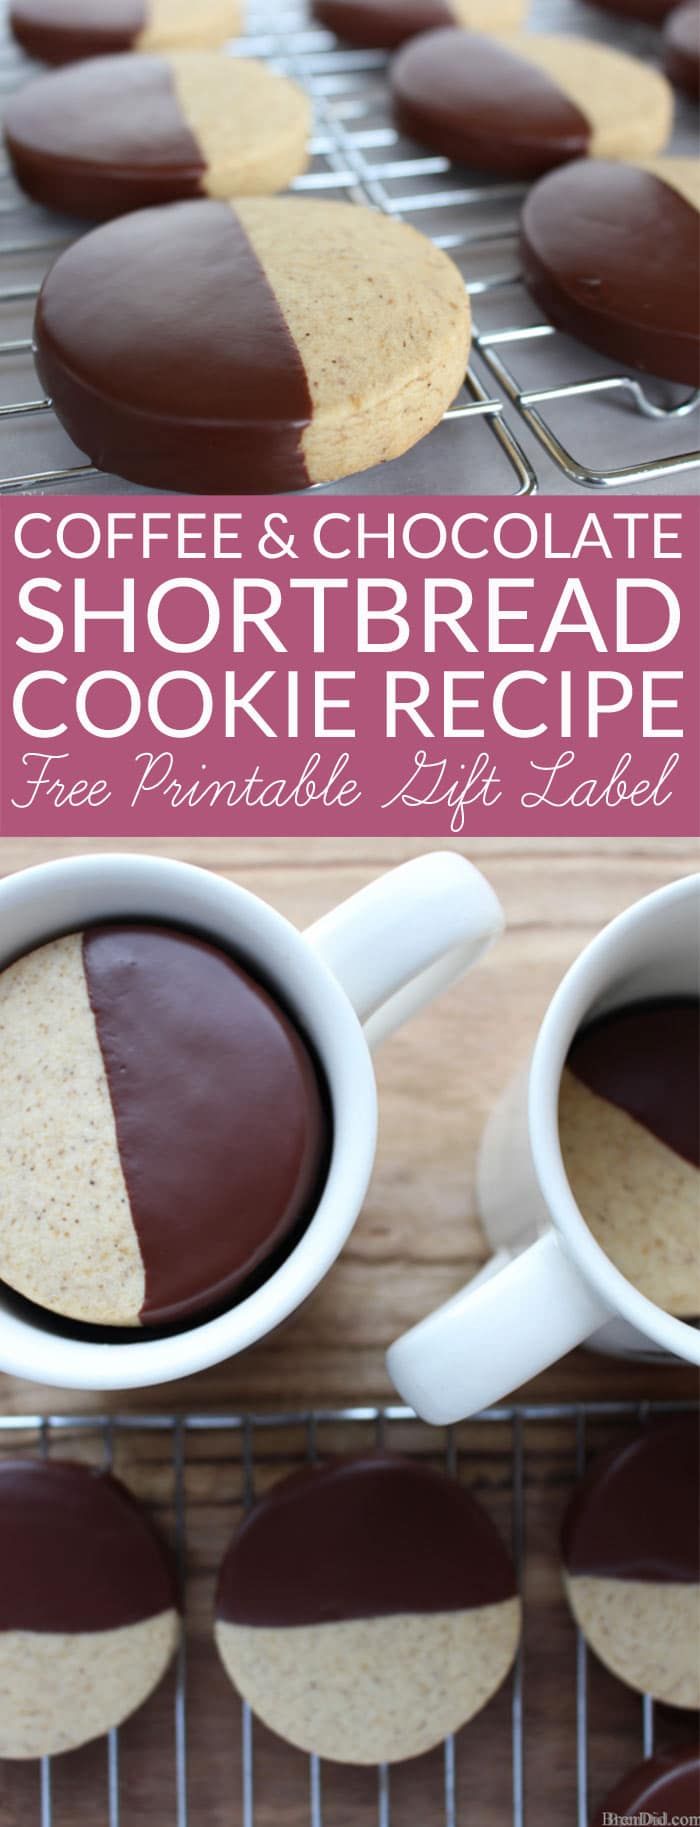 This Coffee and Chocolate Shortbread Recipe is perfect for cookie exchanges and ...